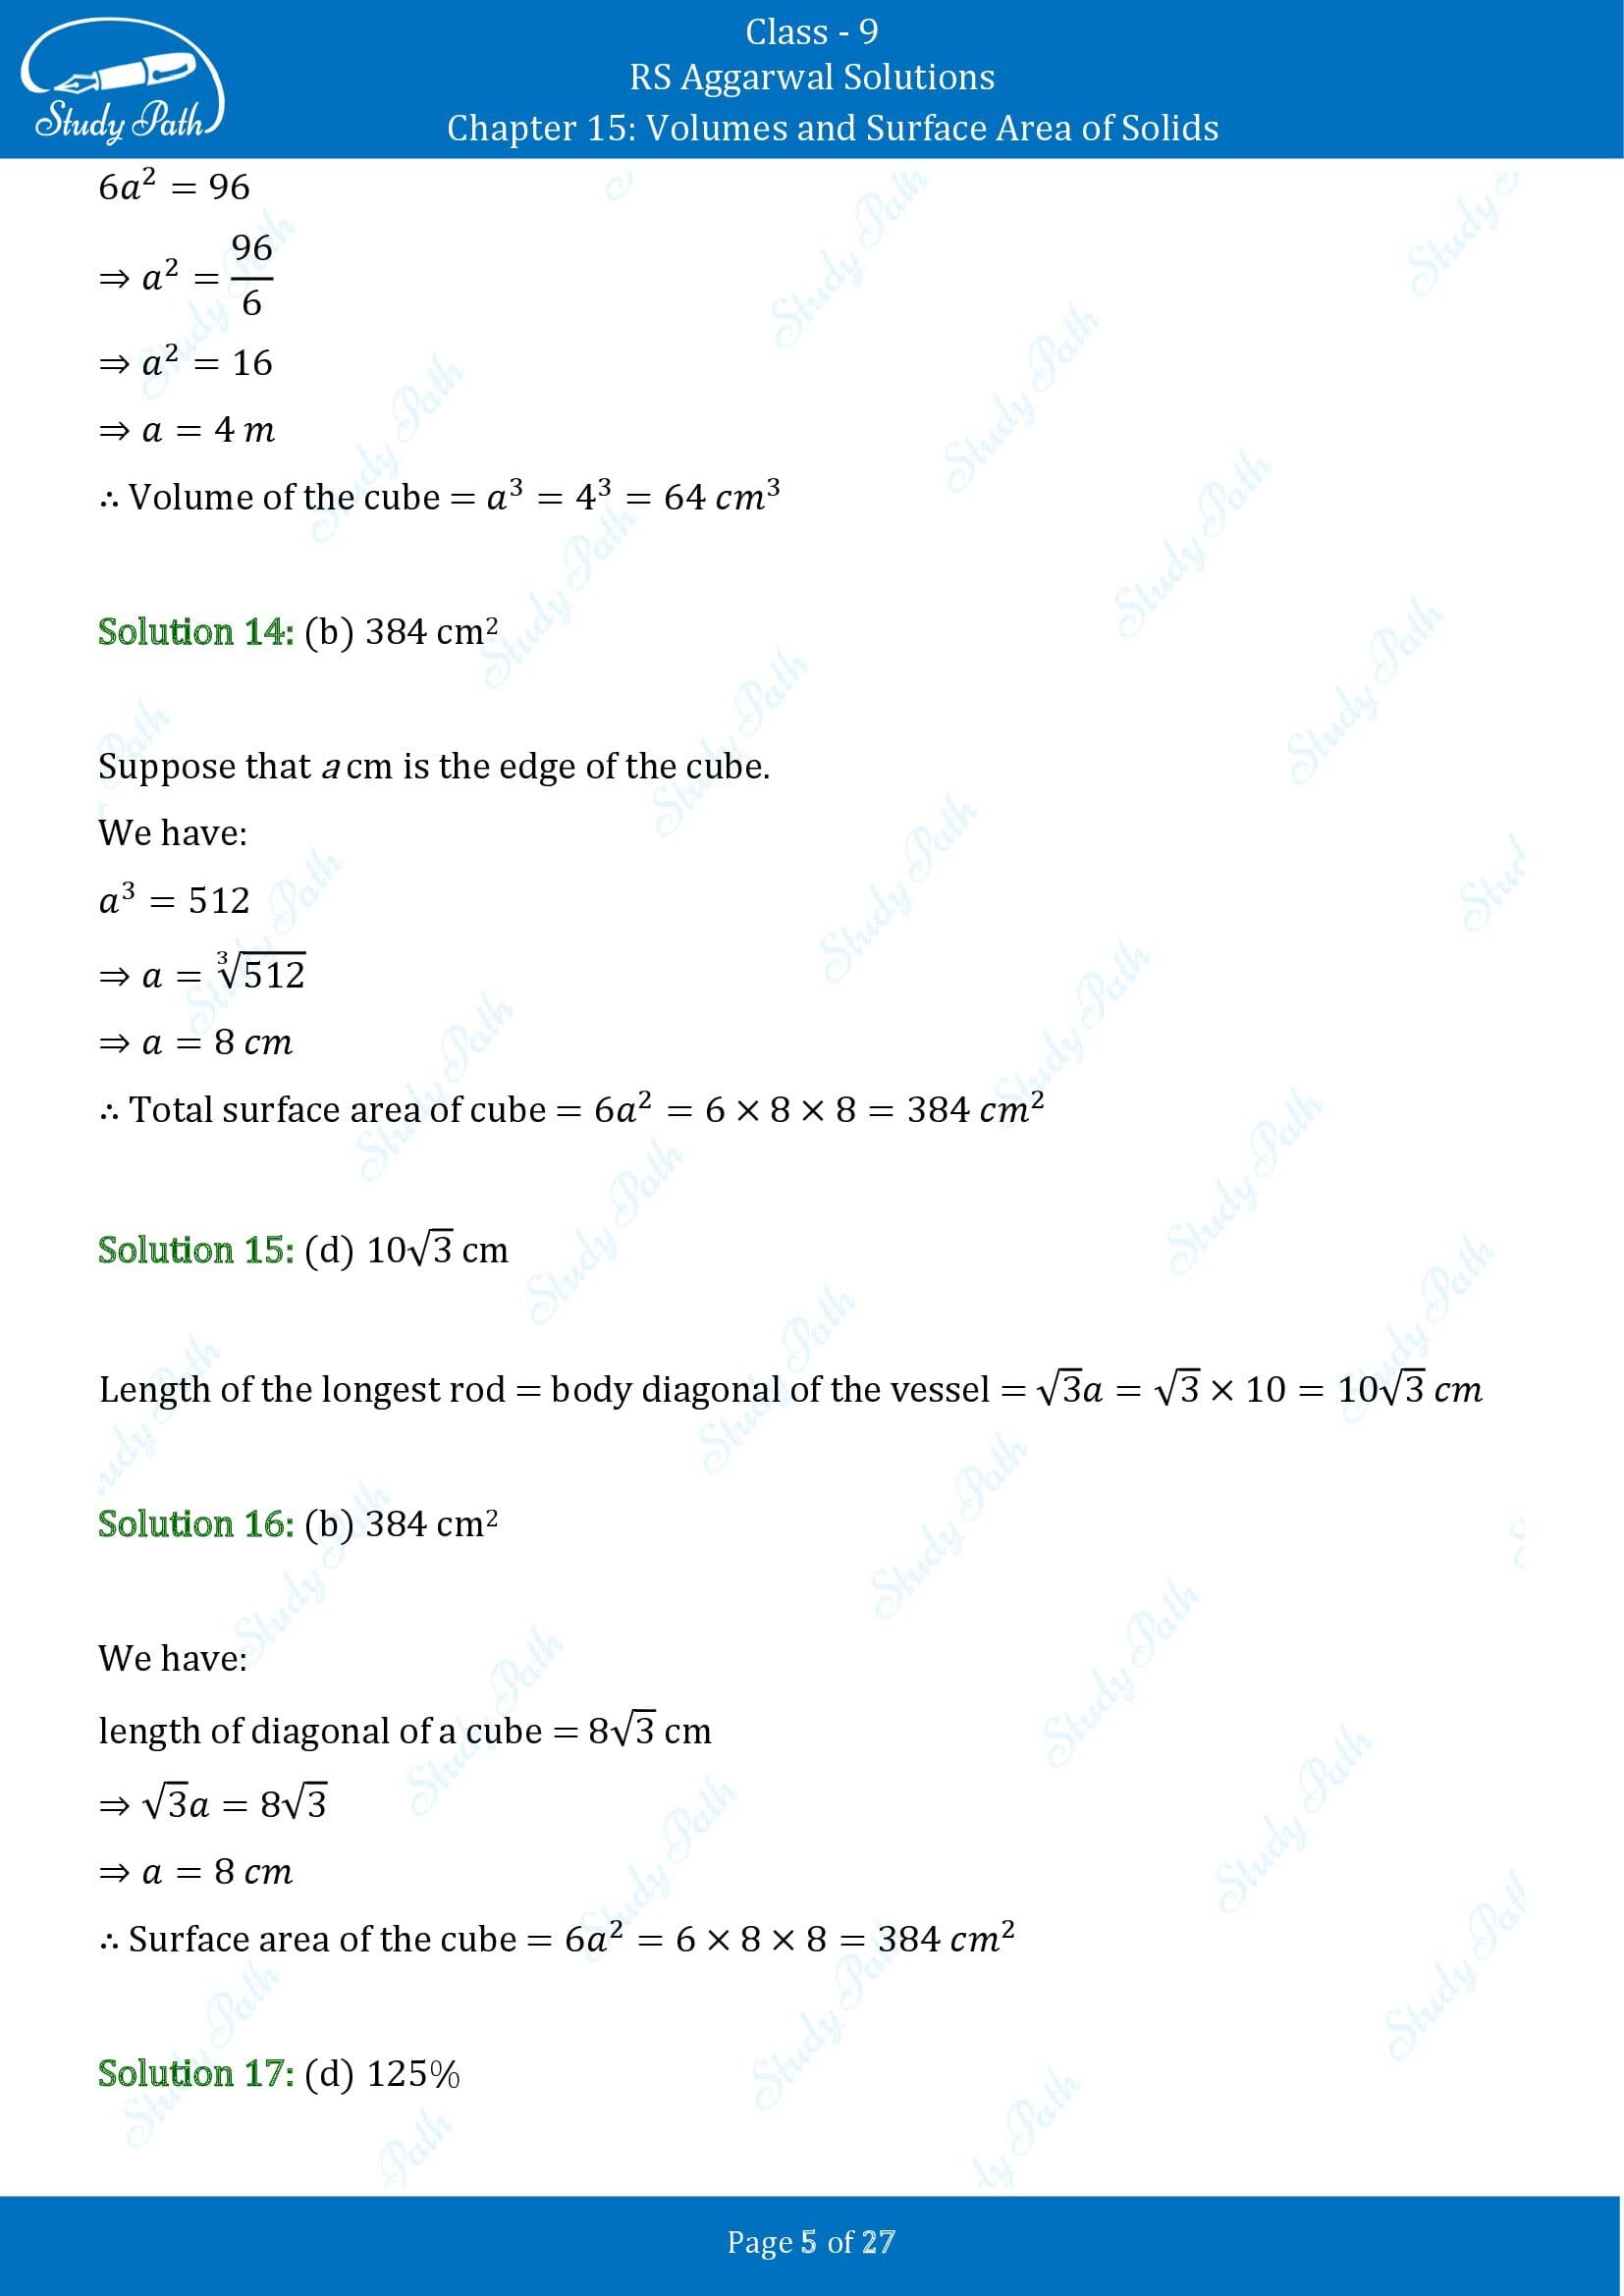 RS Aggarwal Solutions Class 9 Chapter 15 Volumes and Surface Area of Solids Multiple Choice Questions MCQs 00005